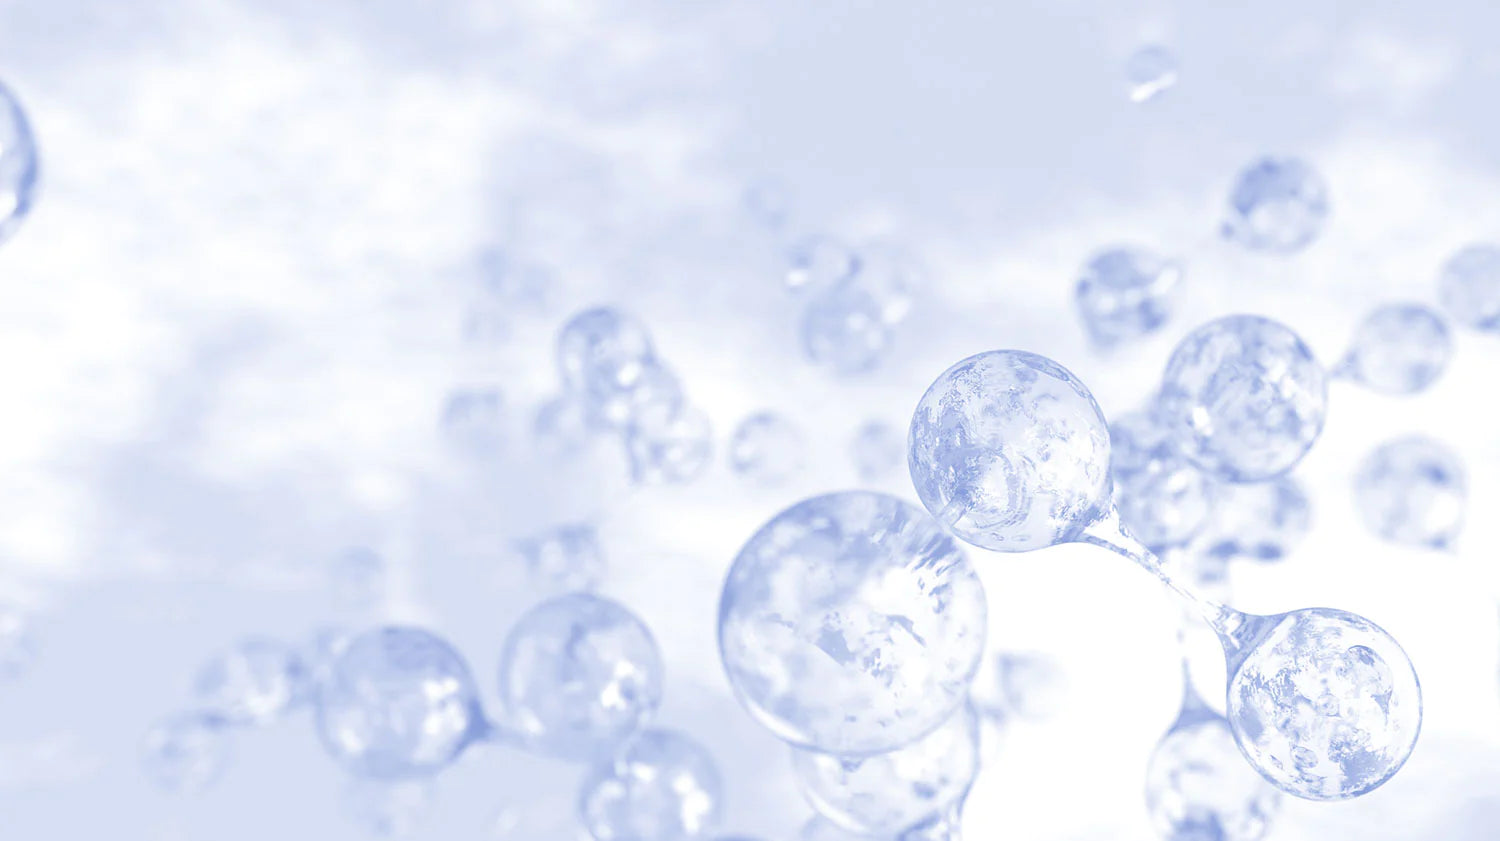 Bubbles floating in the air on a blue background.